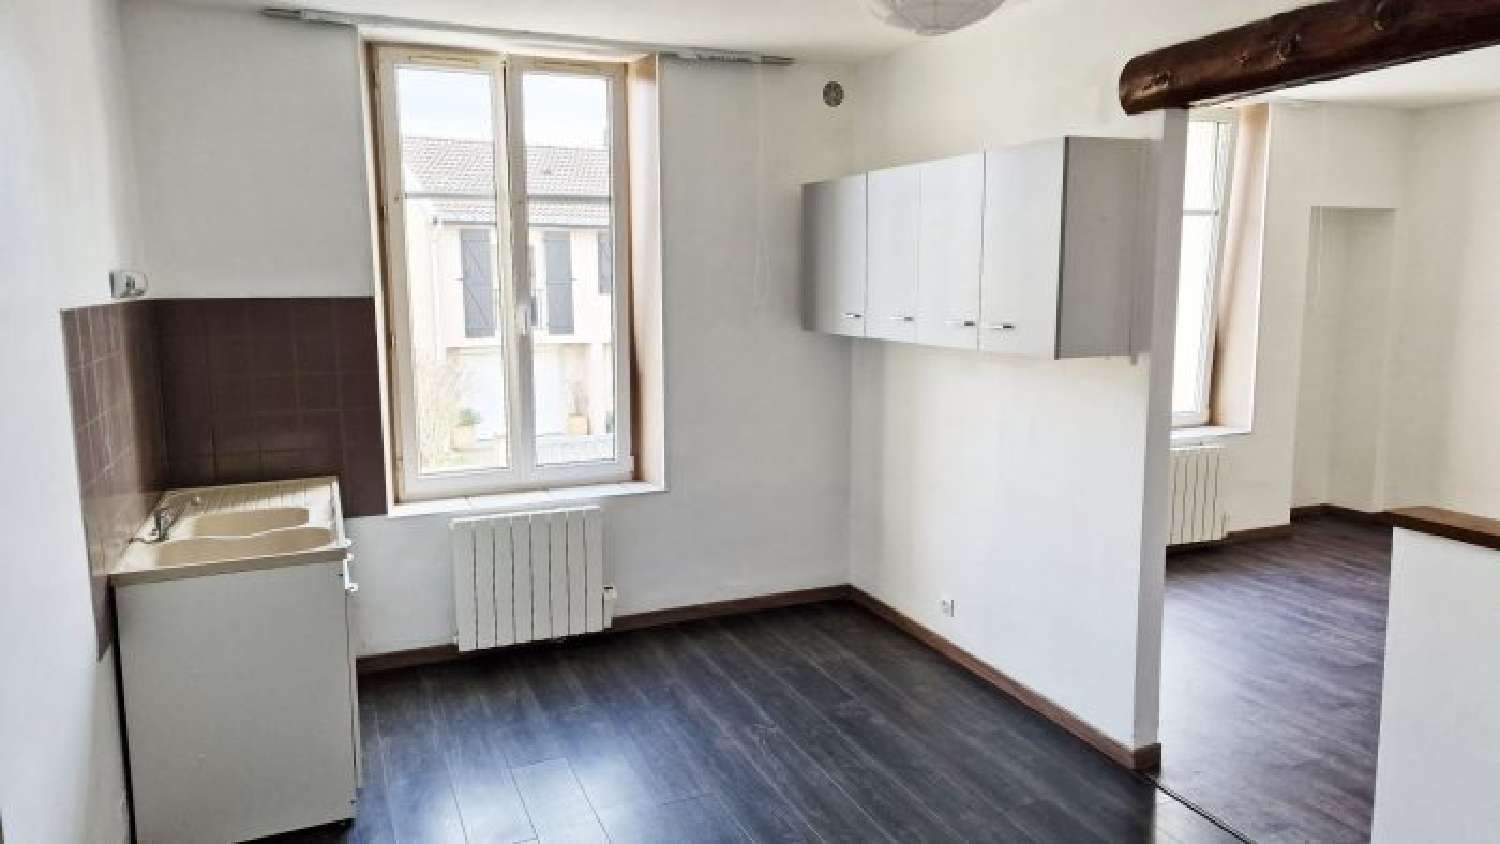  te koop appartement Pagny-sur-Moselle Meurthe-et-Moselle 6